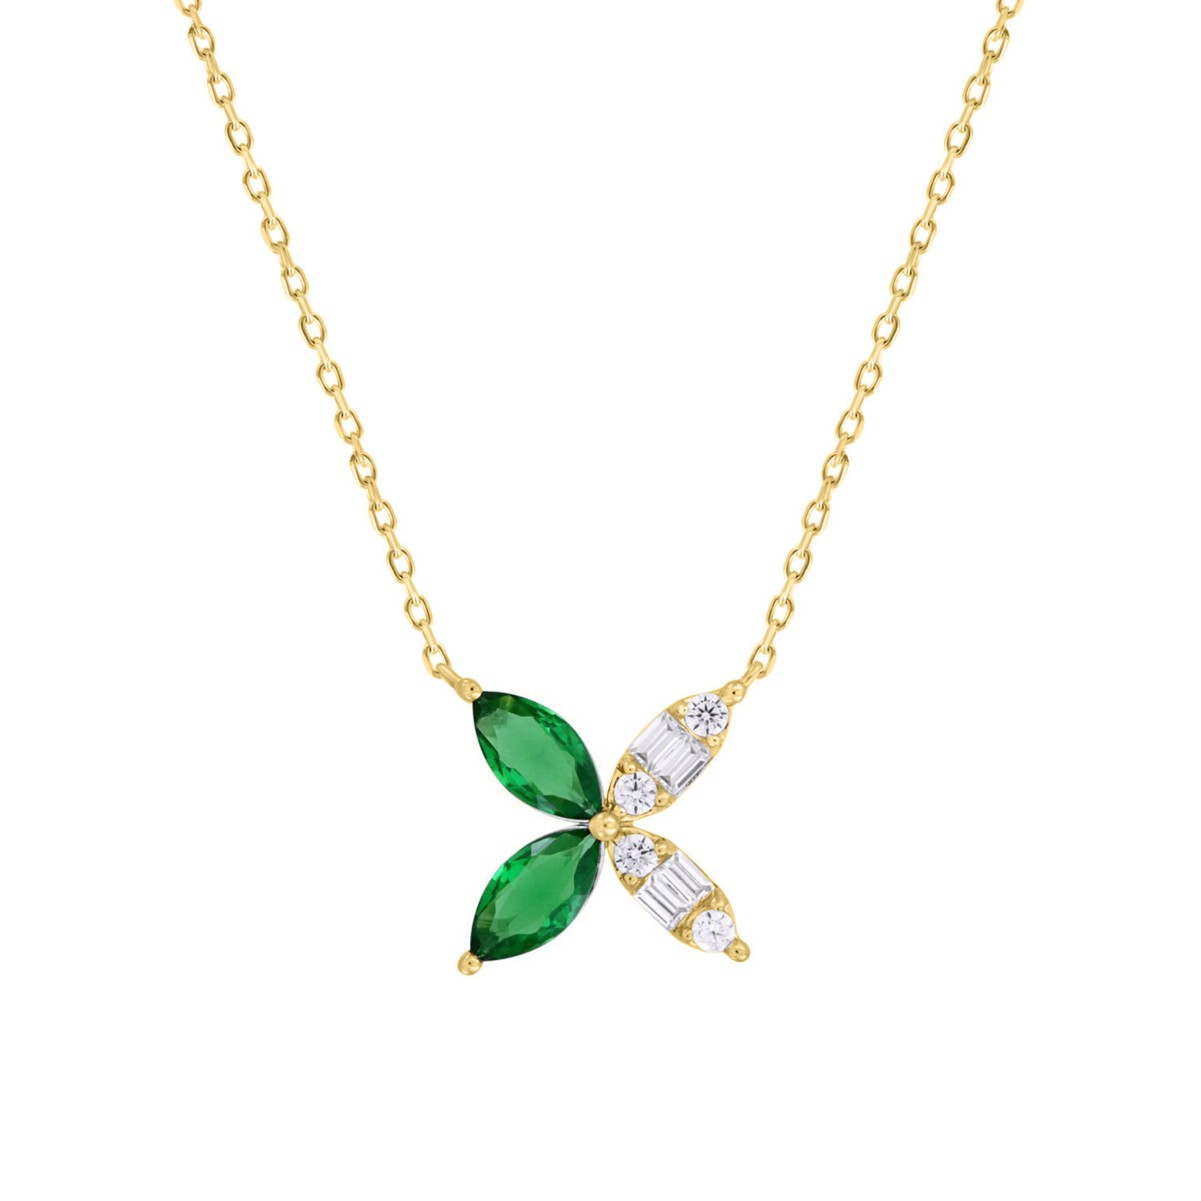 18K YELLOW GOLD 1 3/4CT ROUND/BAGUETTE/MARQUISE DIAMOND LADIES PENDANT WITH CHAIN(COLOR STONE MARQUISE GREEN EMERALD DIAMOND 1 5/8CT)